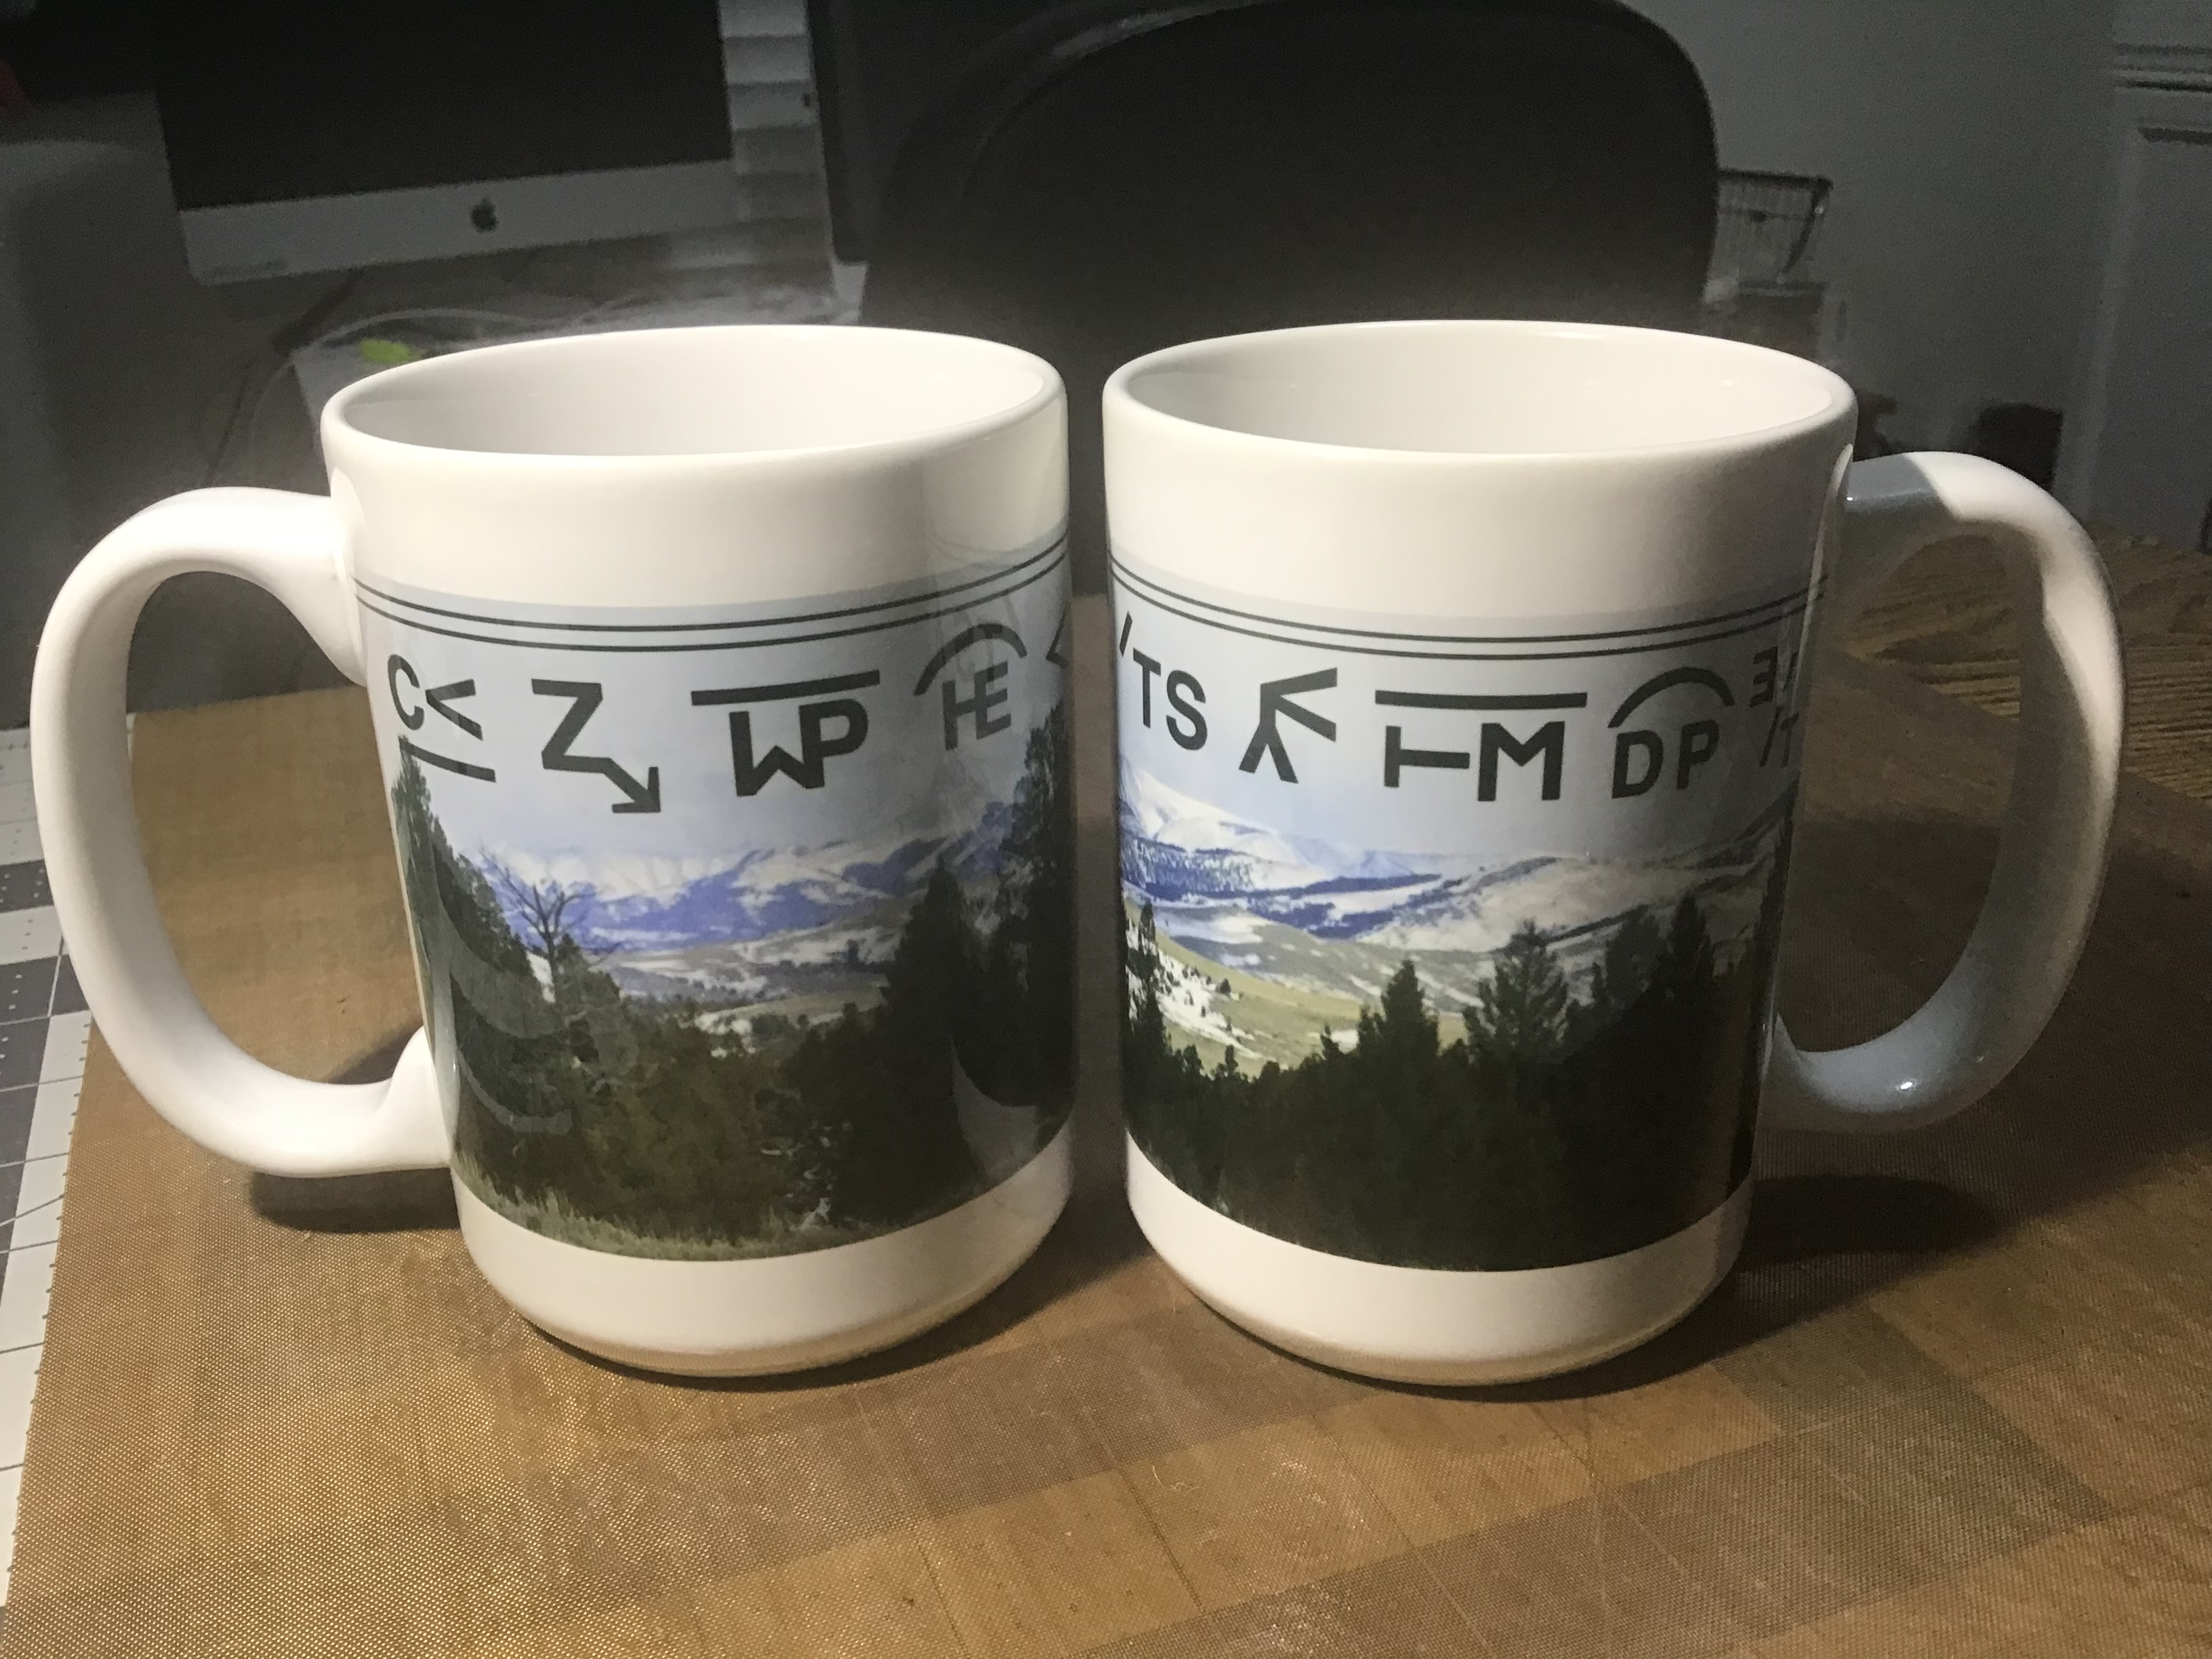 Mug featuring a Mountain scene with local ranchers state brand around top.